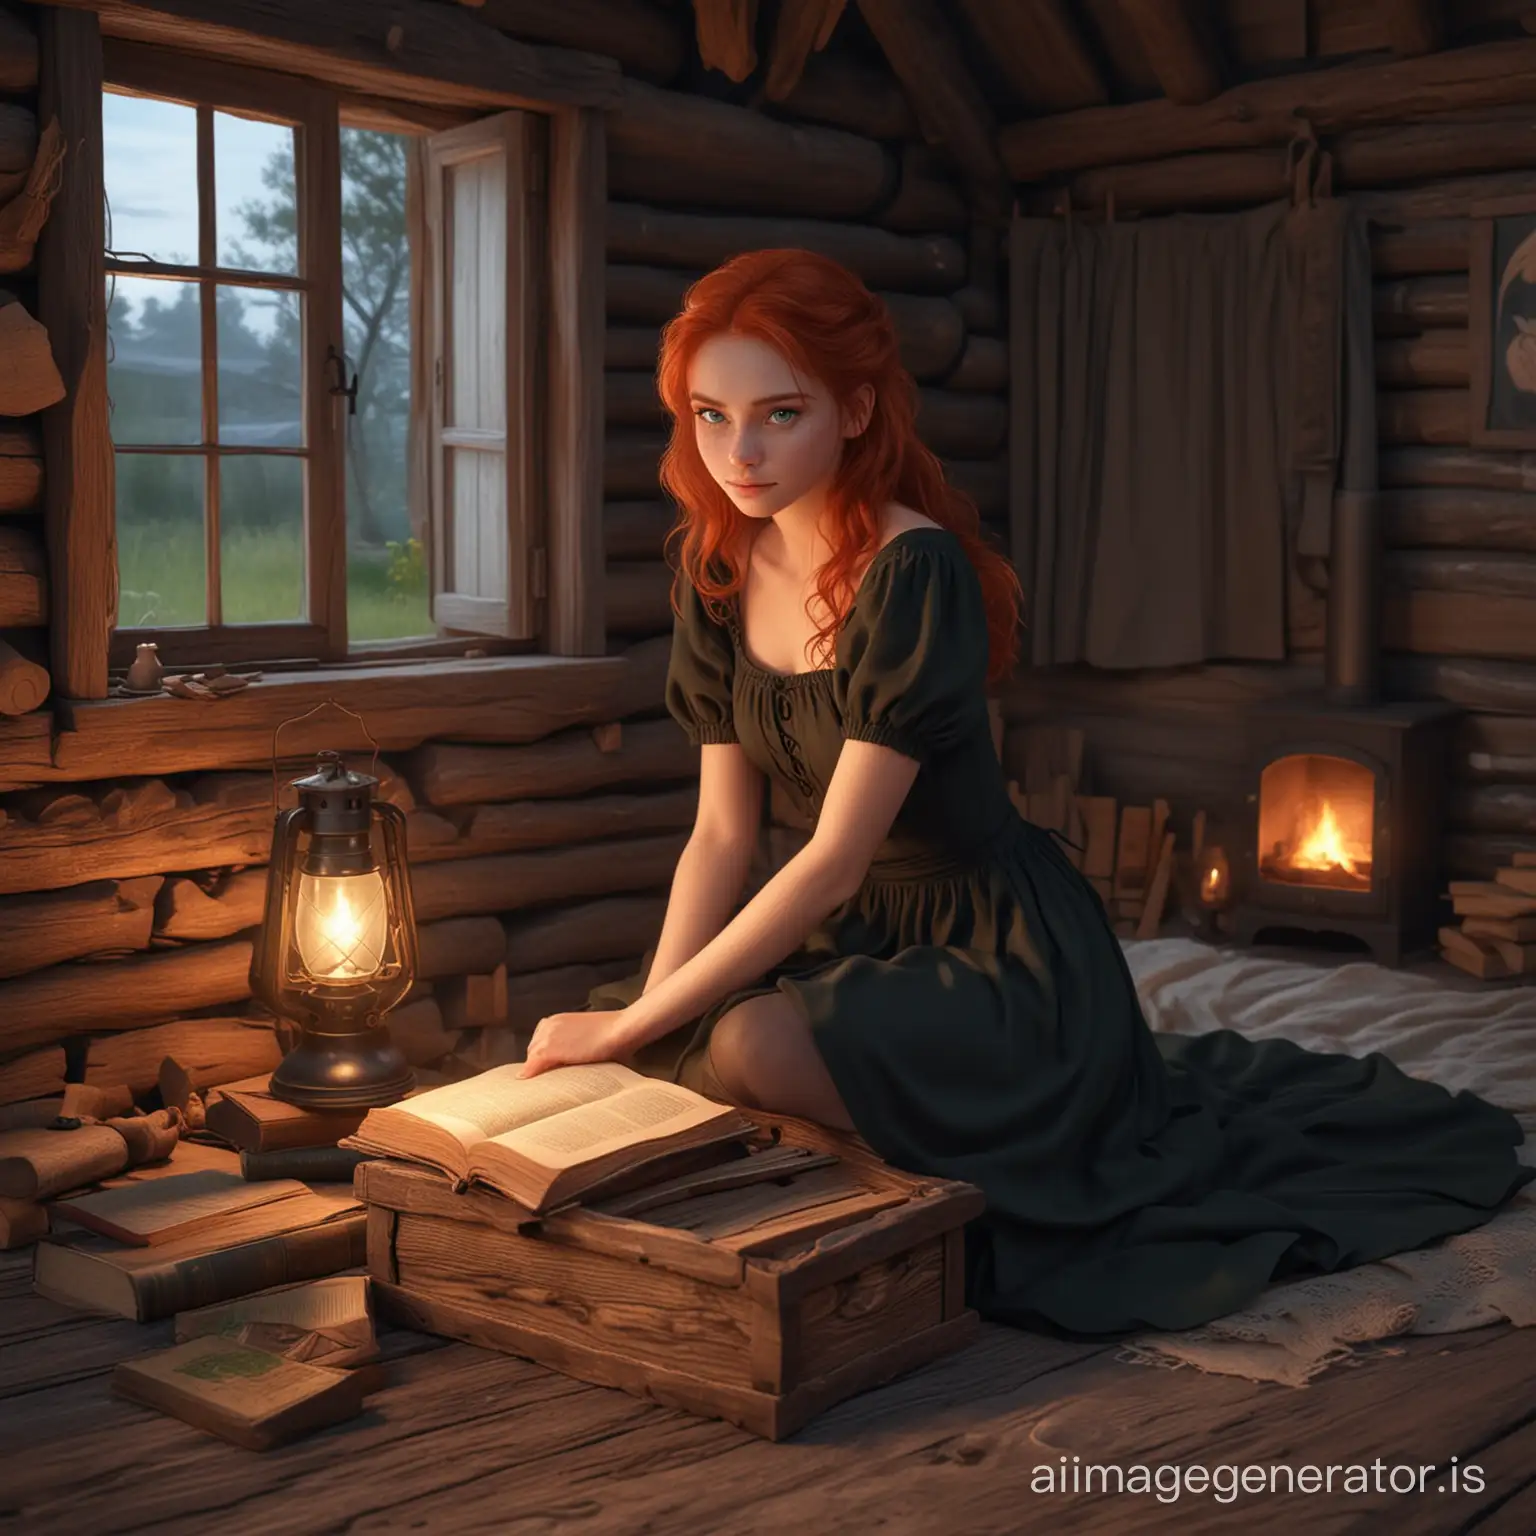 Adorable-Redhead-Girl-with-Book-in-Enchanting-Log-Hut-Bedroom